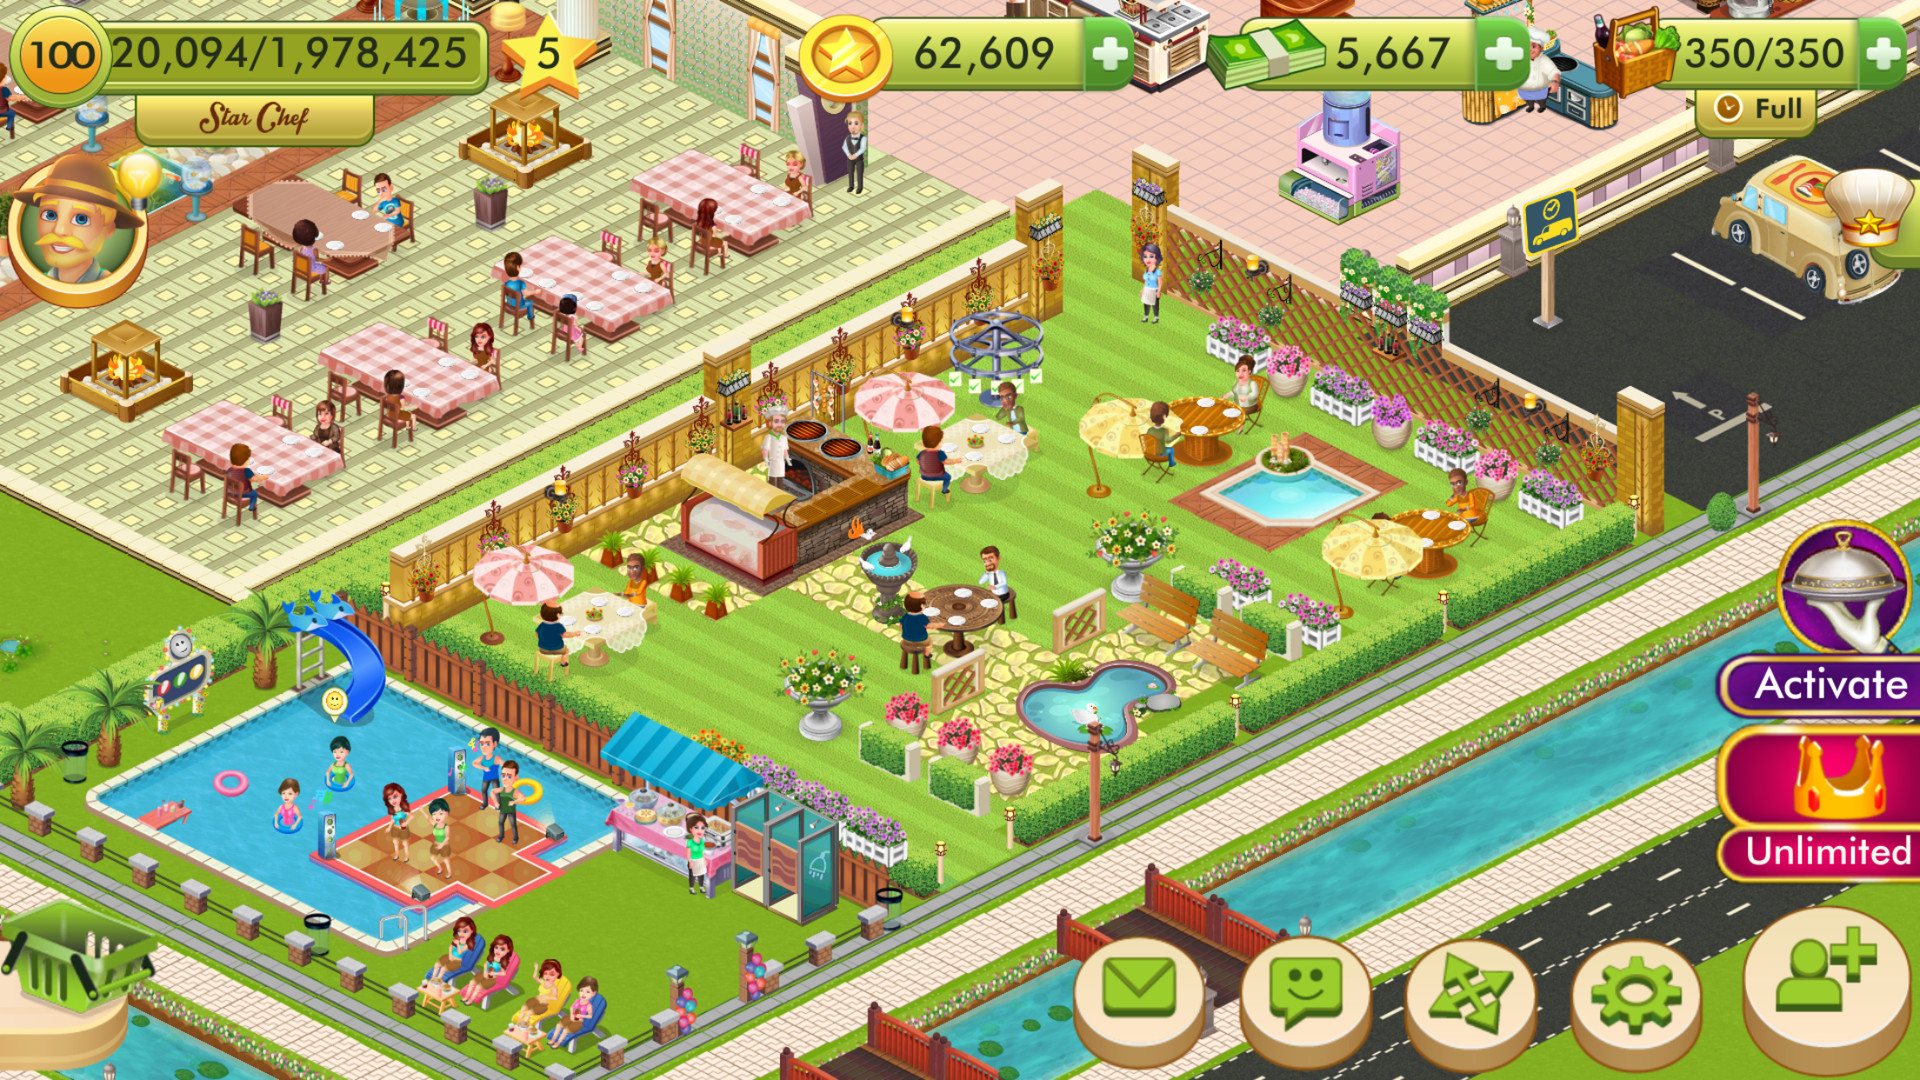 Download Star Chef Cooking Restaurant  Game  Full PC  MAC Game 